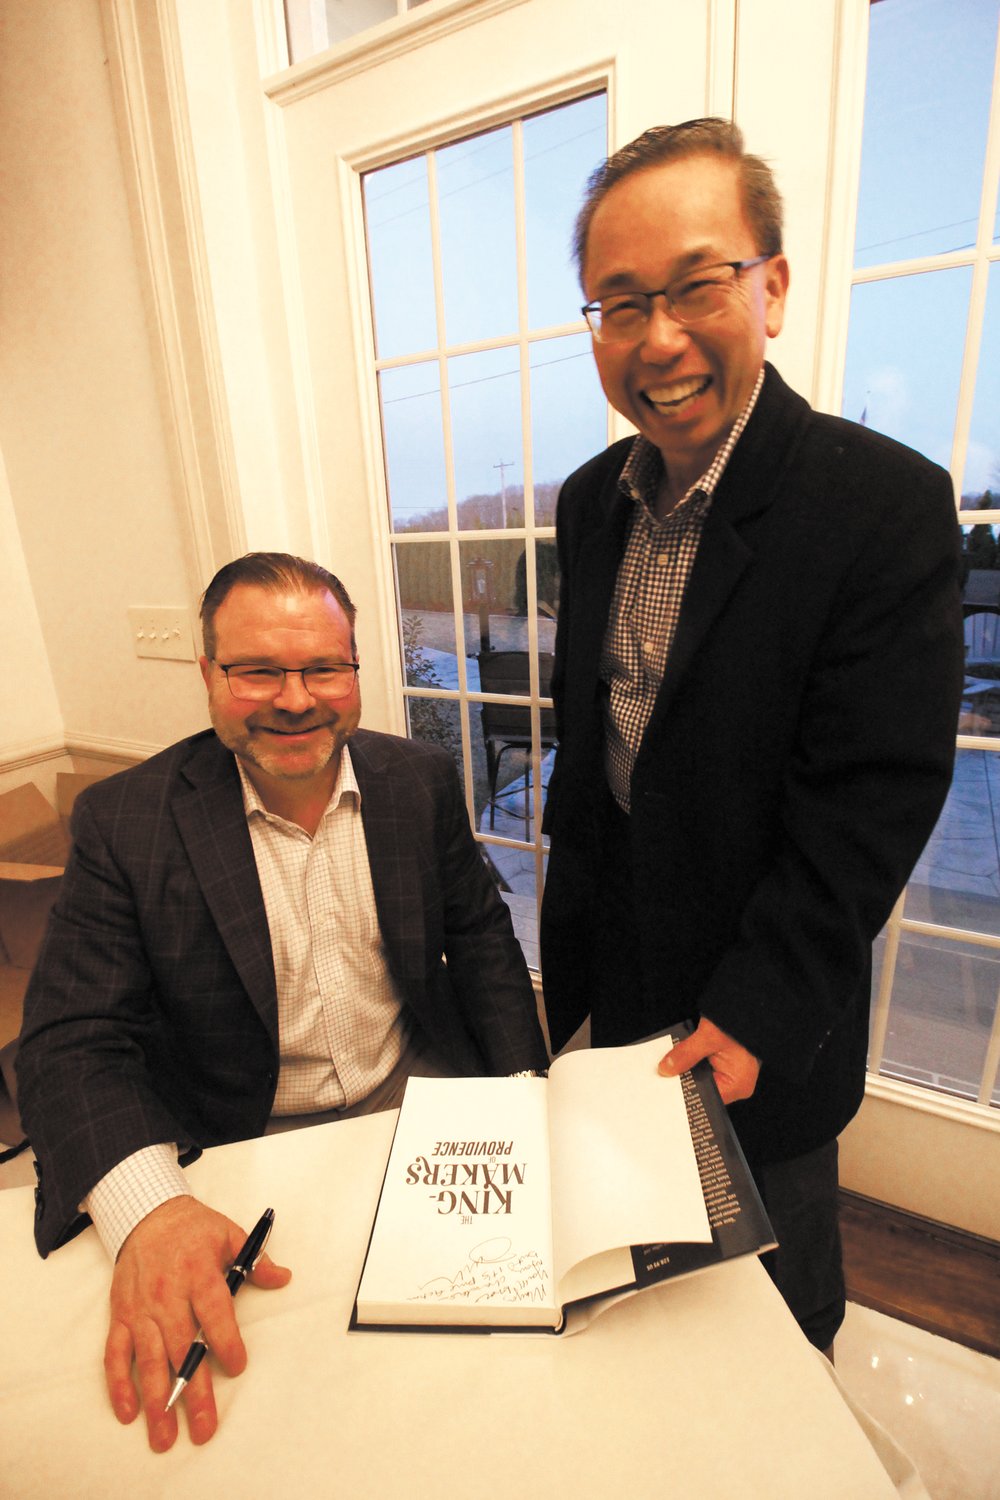 IS HE IN THE BOOK? Former Cranston Mayor Allan Fung didn’t really think he is a character in John Houle’s recently released The King-Makers of Providence, but the question evoked laughs last Wednesday at the novel’s book signing at the Alpine Country Club in Cranston. While Houle, who runs his own advertising and public relations firm maintains all the characters in the book are fictional, it’s not hard to imagine some were patterned from some of the state’s colorful politicians. Houle grew up in the Gaspee section of Warwick. He said there have been talks of making a movie based on the book.  Houle is already working on his second novel.  (Warwick Beacon  photo)